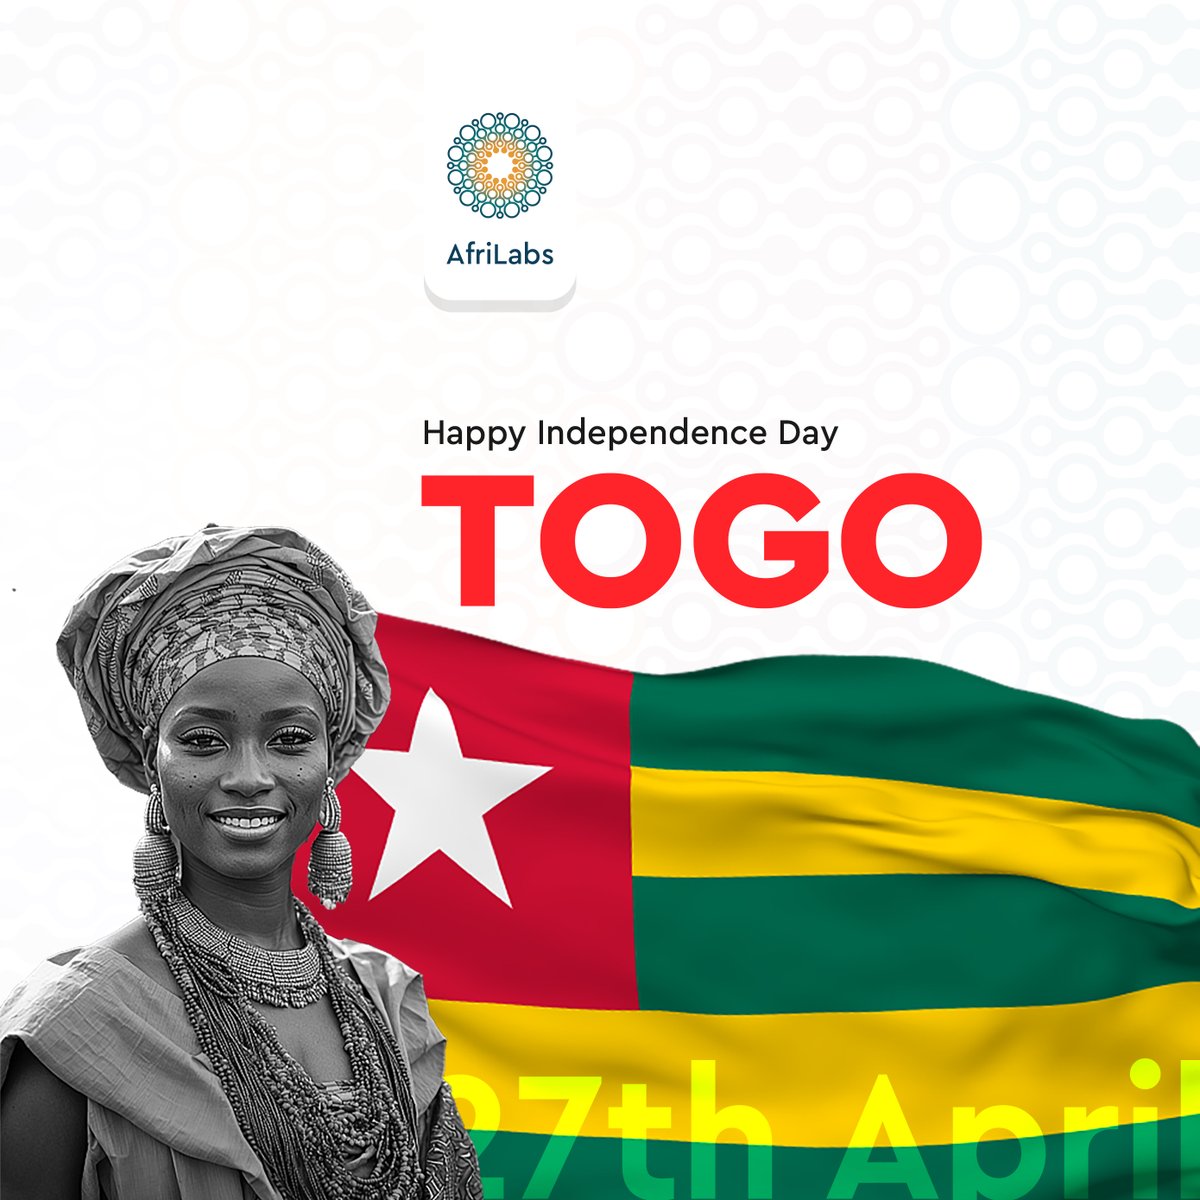 ✊ Happy Independence Day Togo!